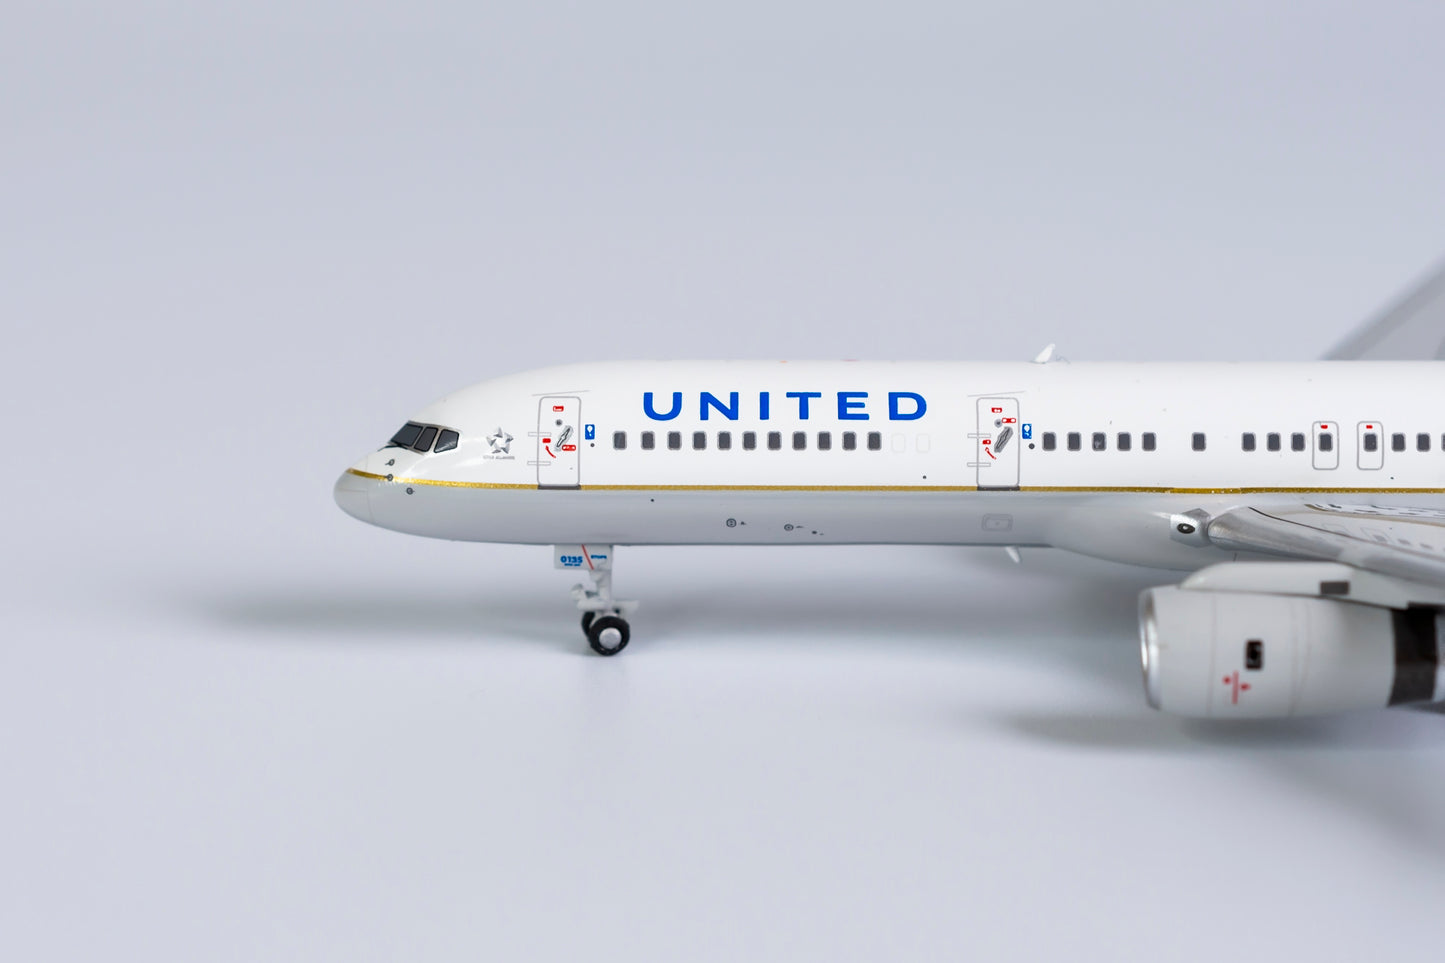 1:400 NG Models United Airlines Boeing 757-200 "Co-Merger Livery" N41135 53179